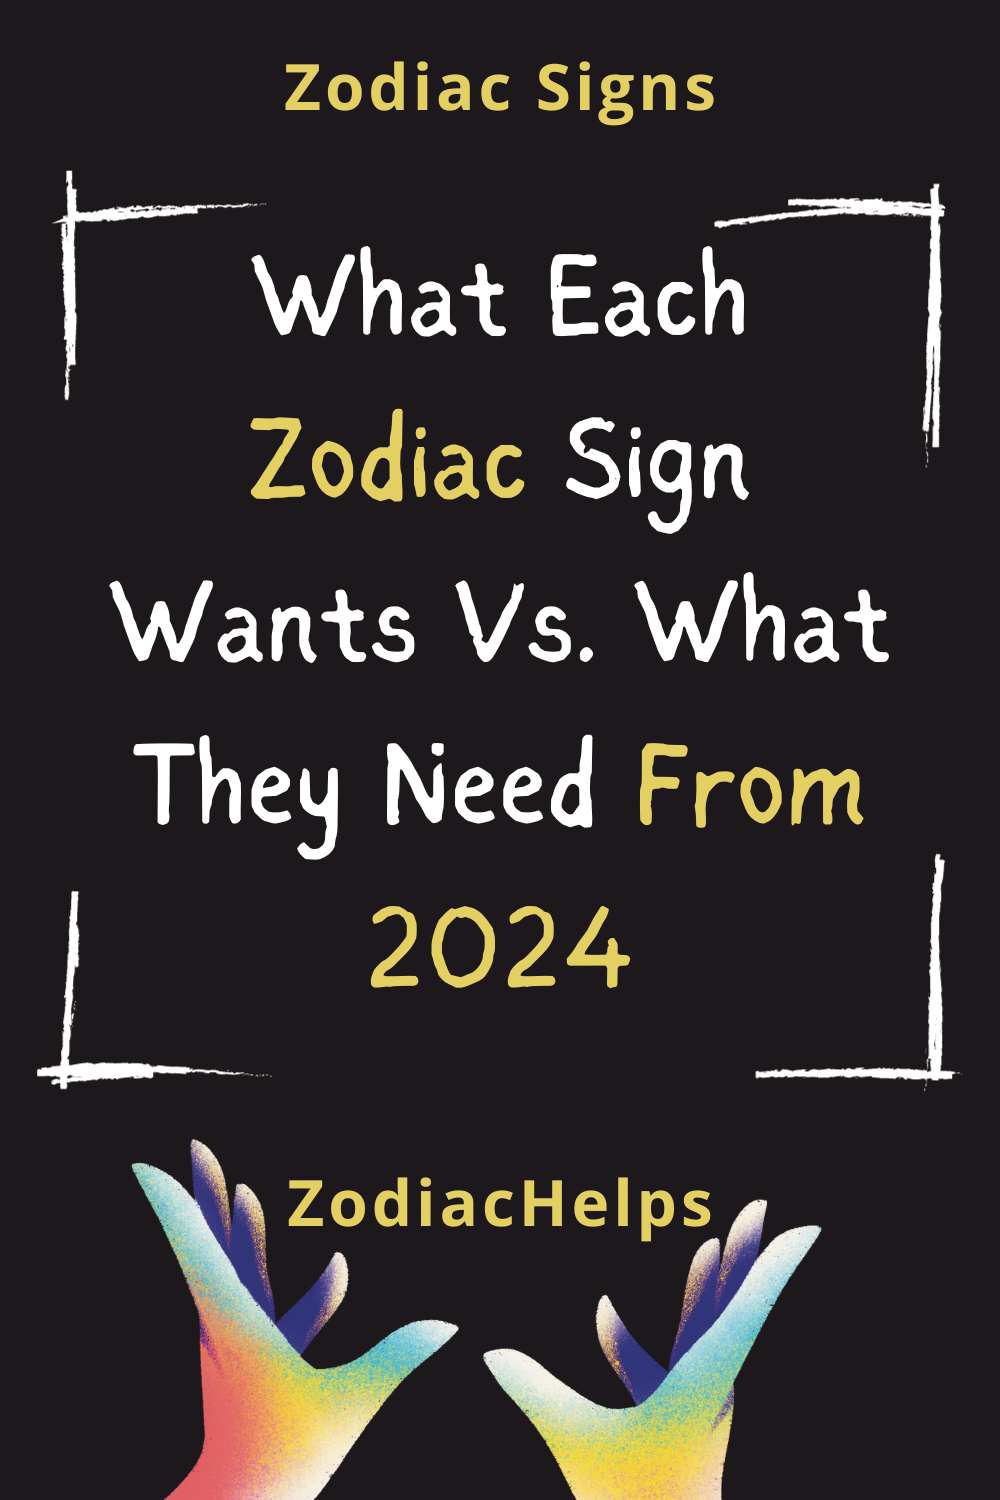 What Each Zodiac Sign Wants Vs. What They Need From 2024